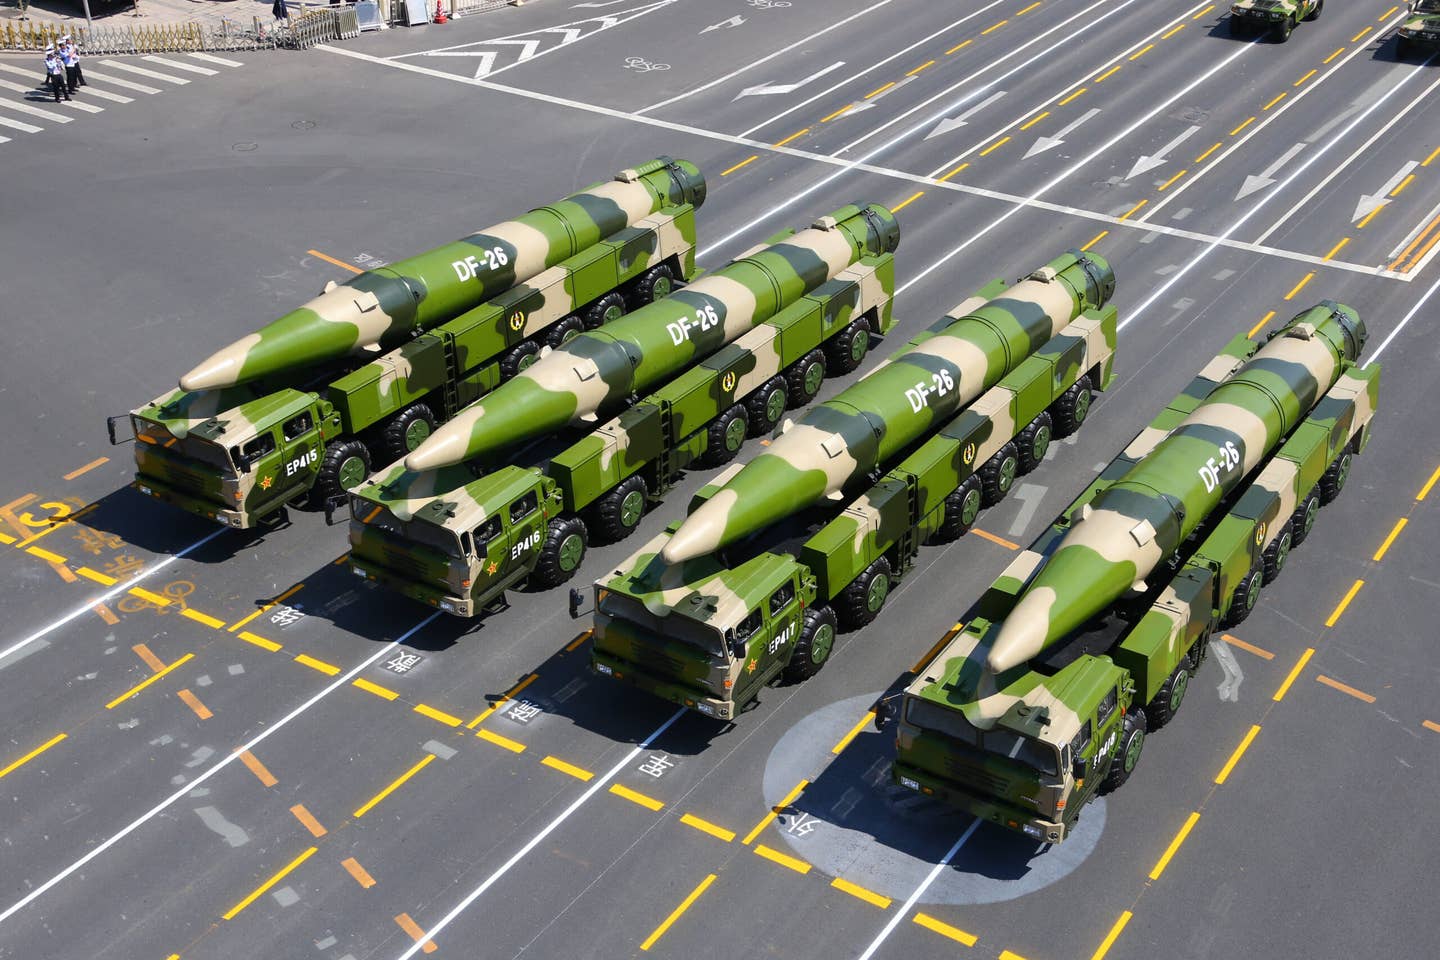 Chinese DF-26 intermediate-range ballistic missiles attend a military parade in Beijing. <em>Xinhua/Cha Chunming via Getty Images</em>